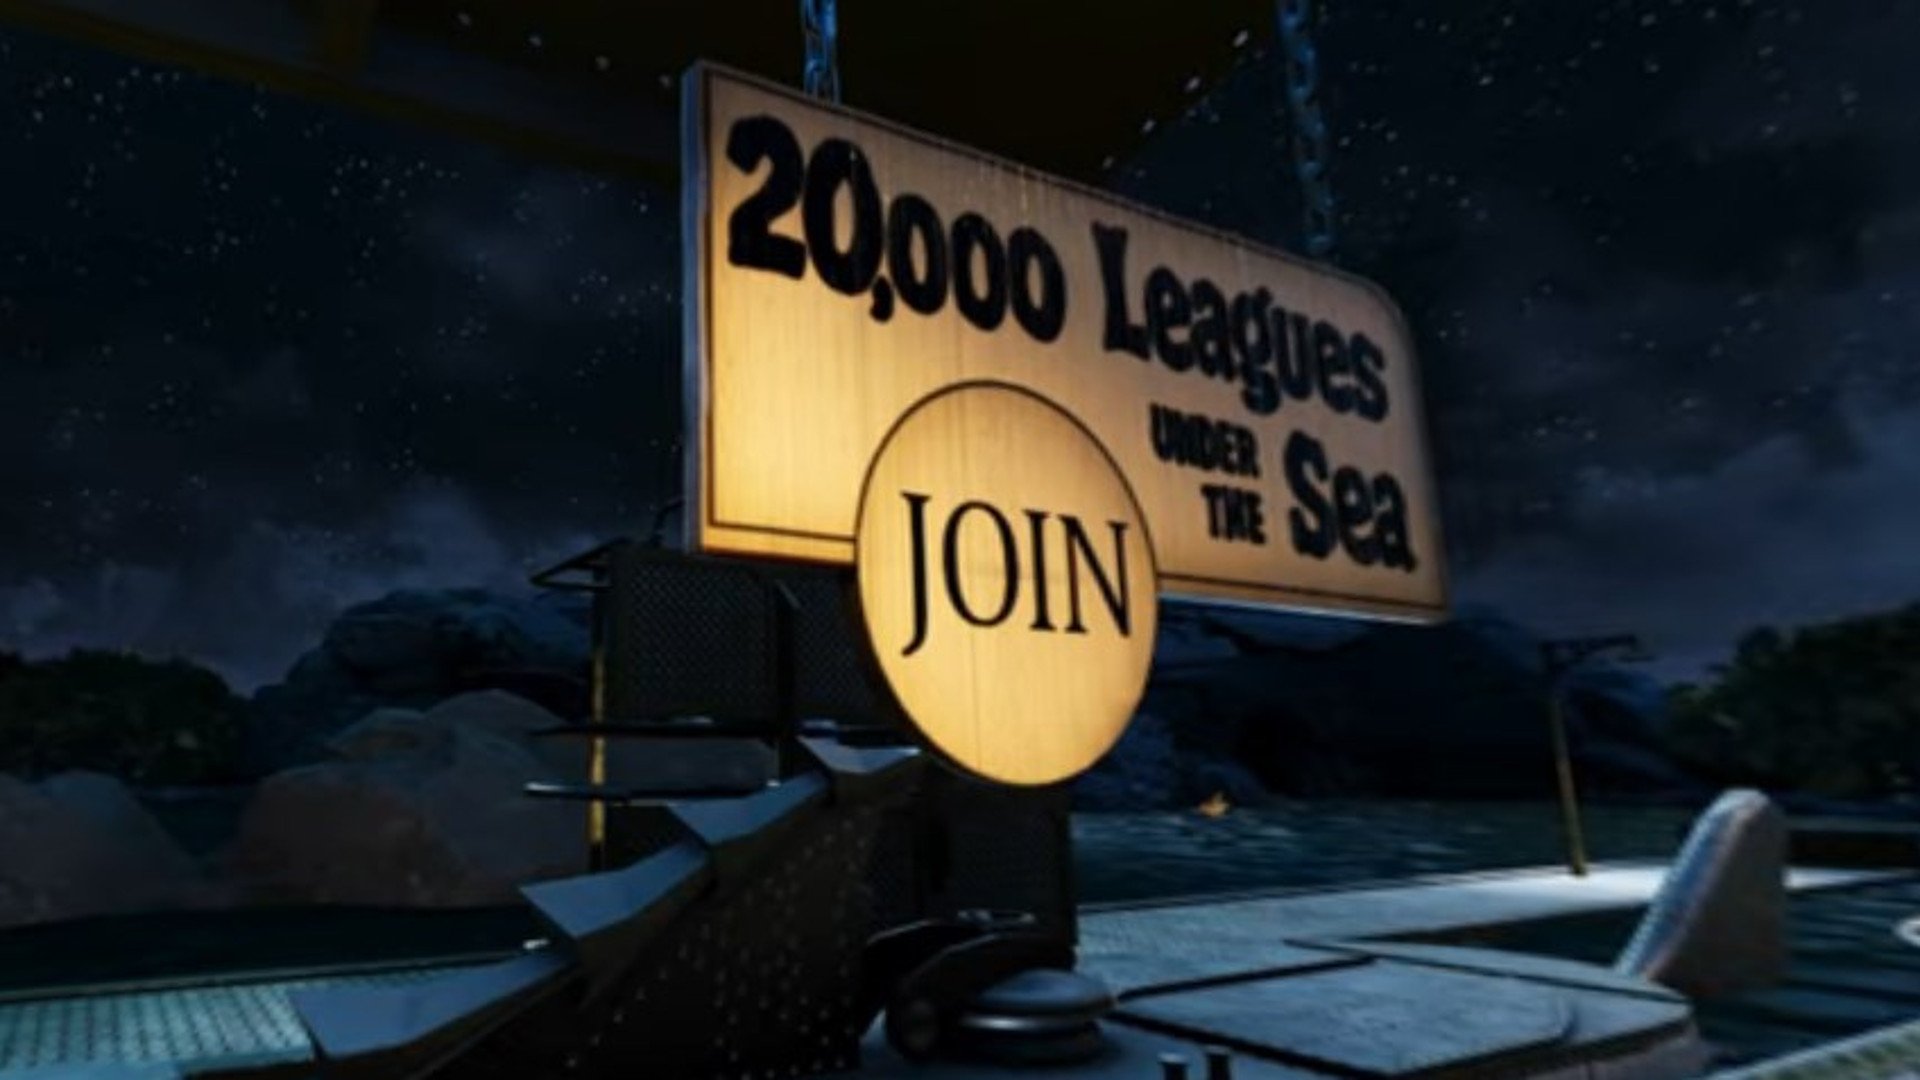 Disney's VR decommissioned 20,000 Leagues Under the Sea